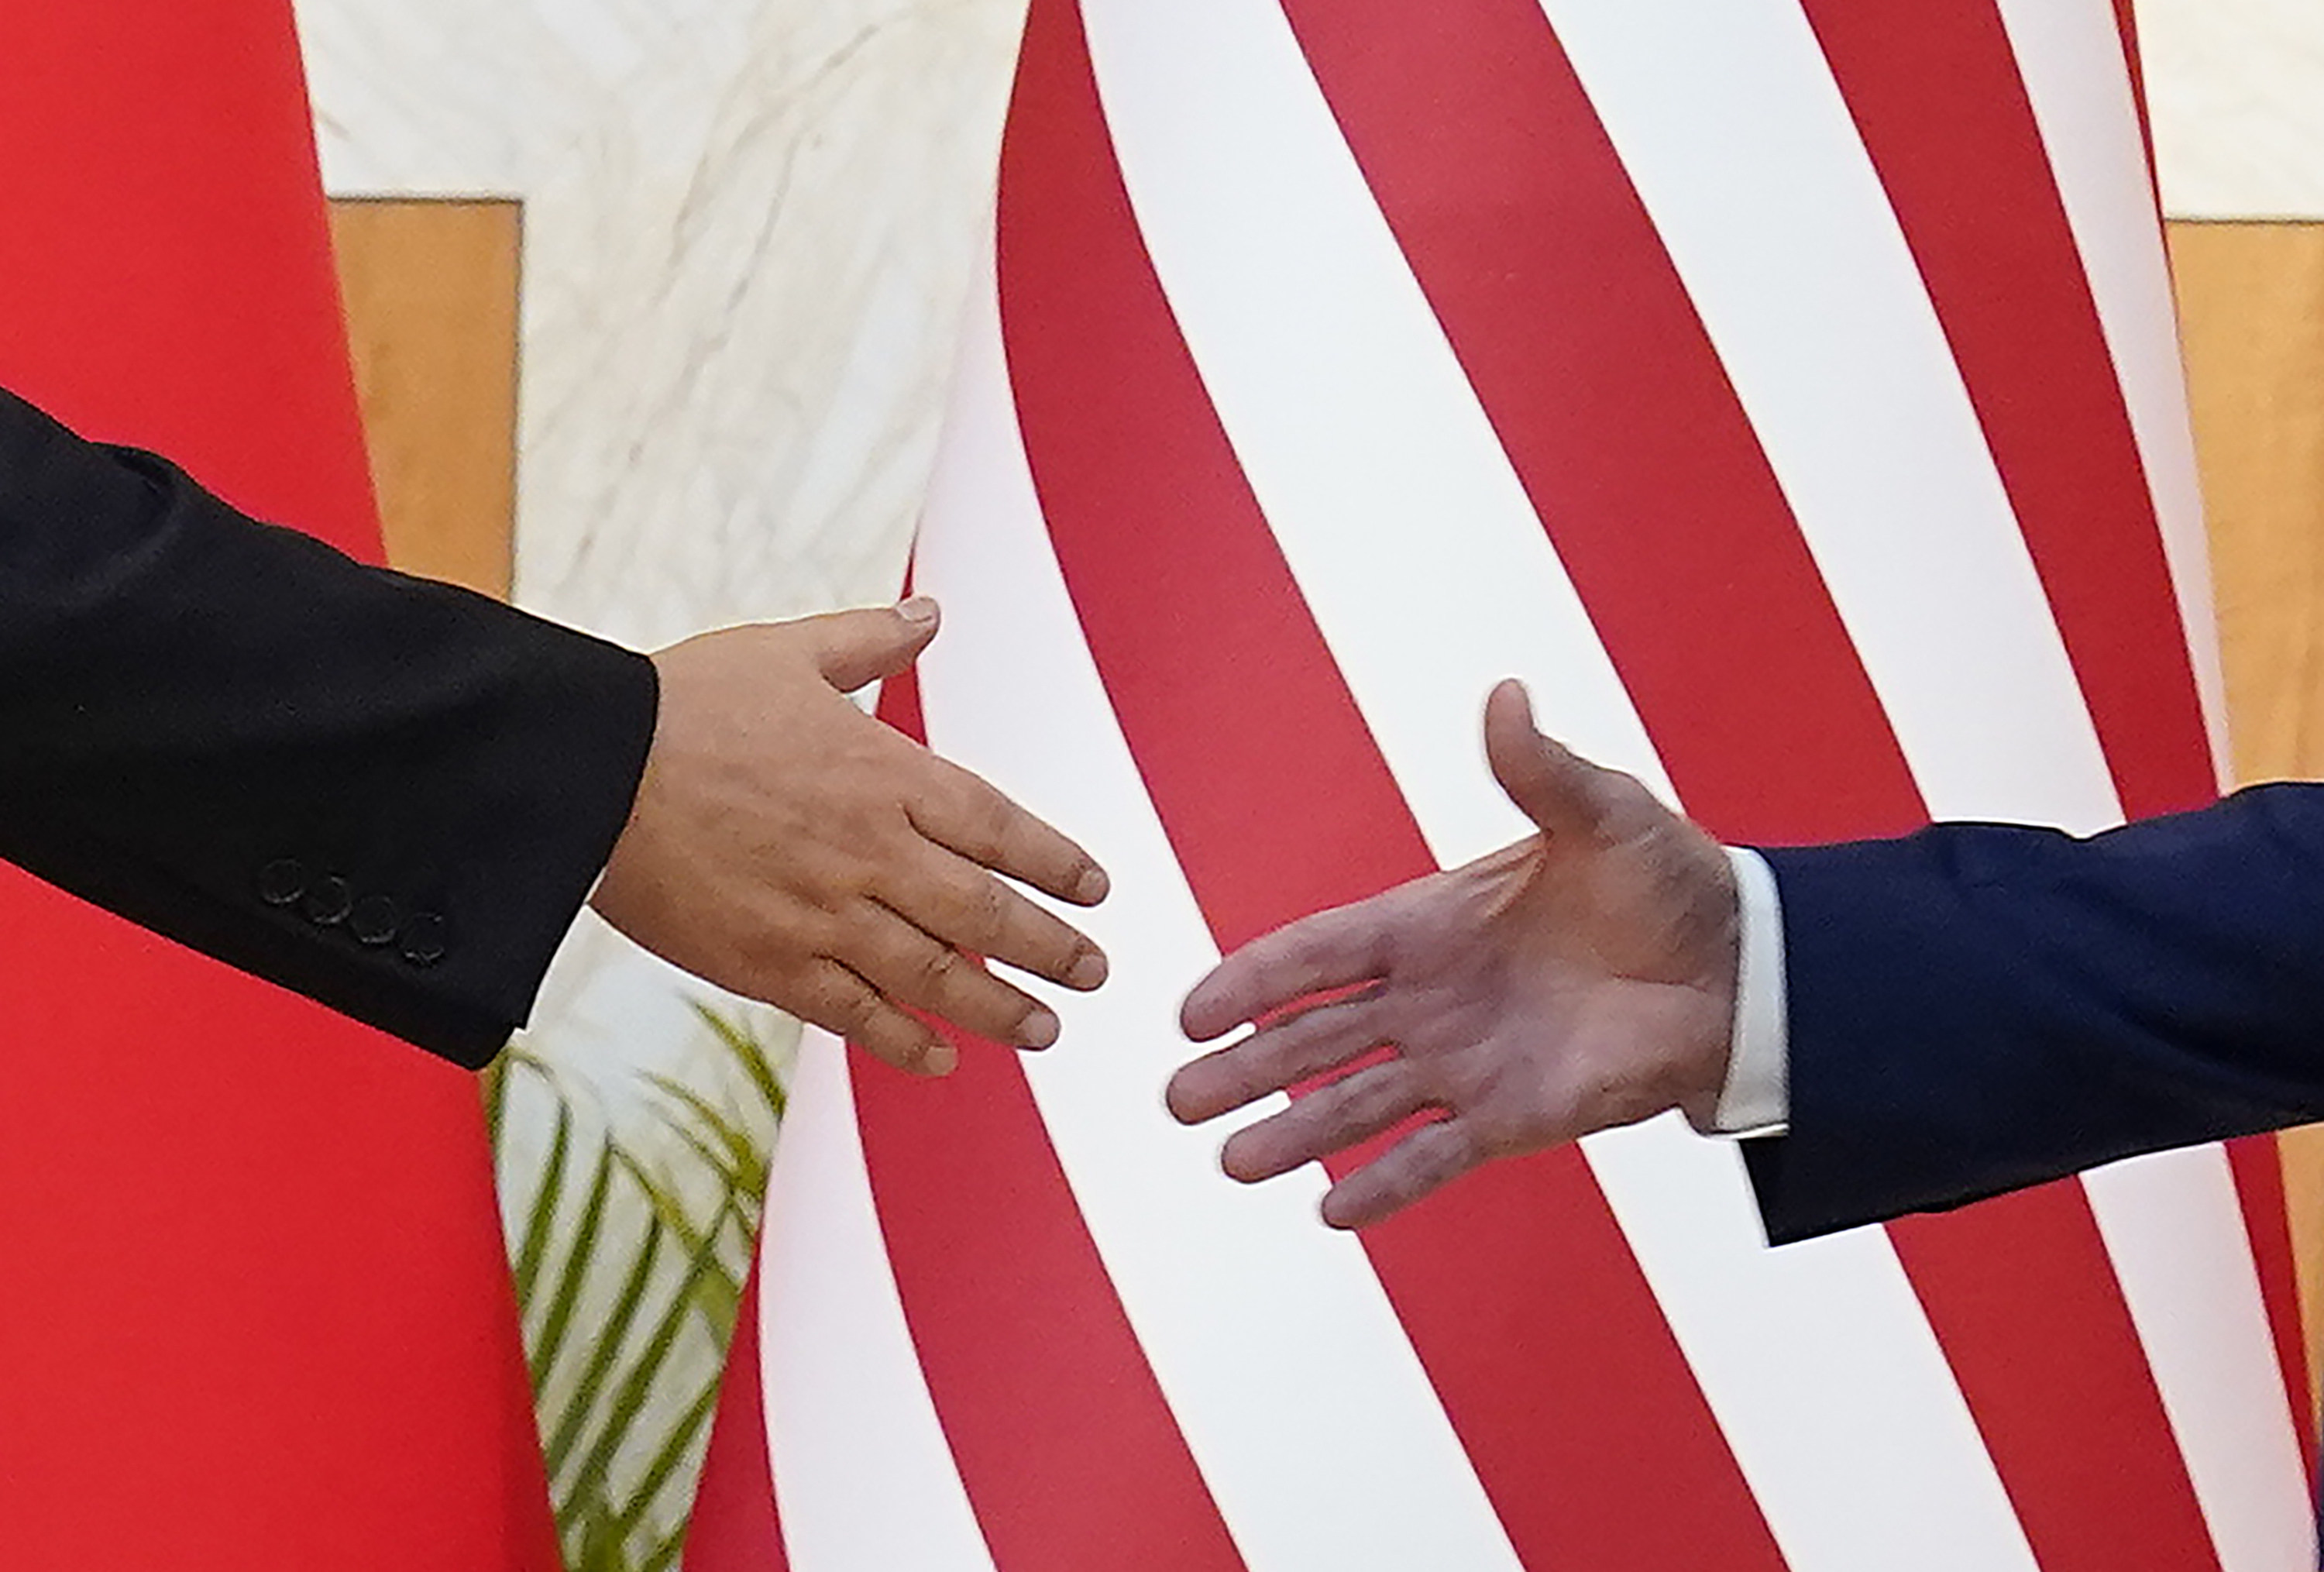 After the US midterms, Chinese experts say bilateral relations between China and the US will remain turbulent and unpredictable. Photo: AP